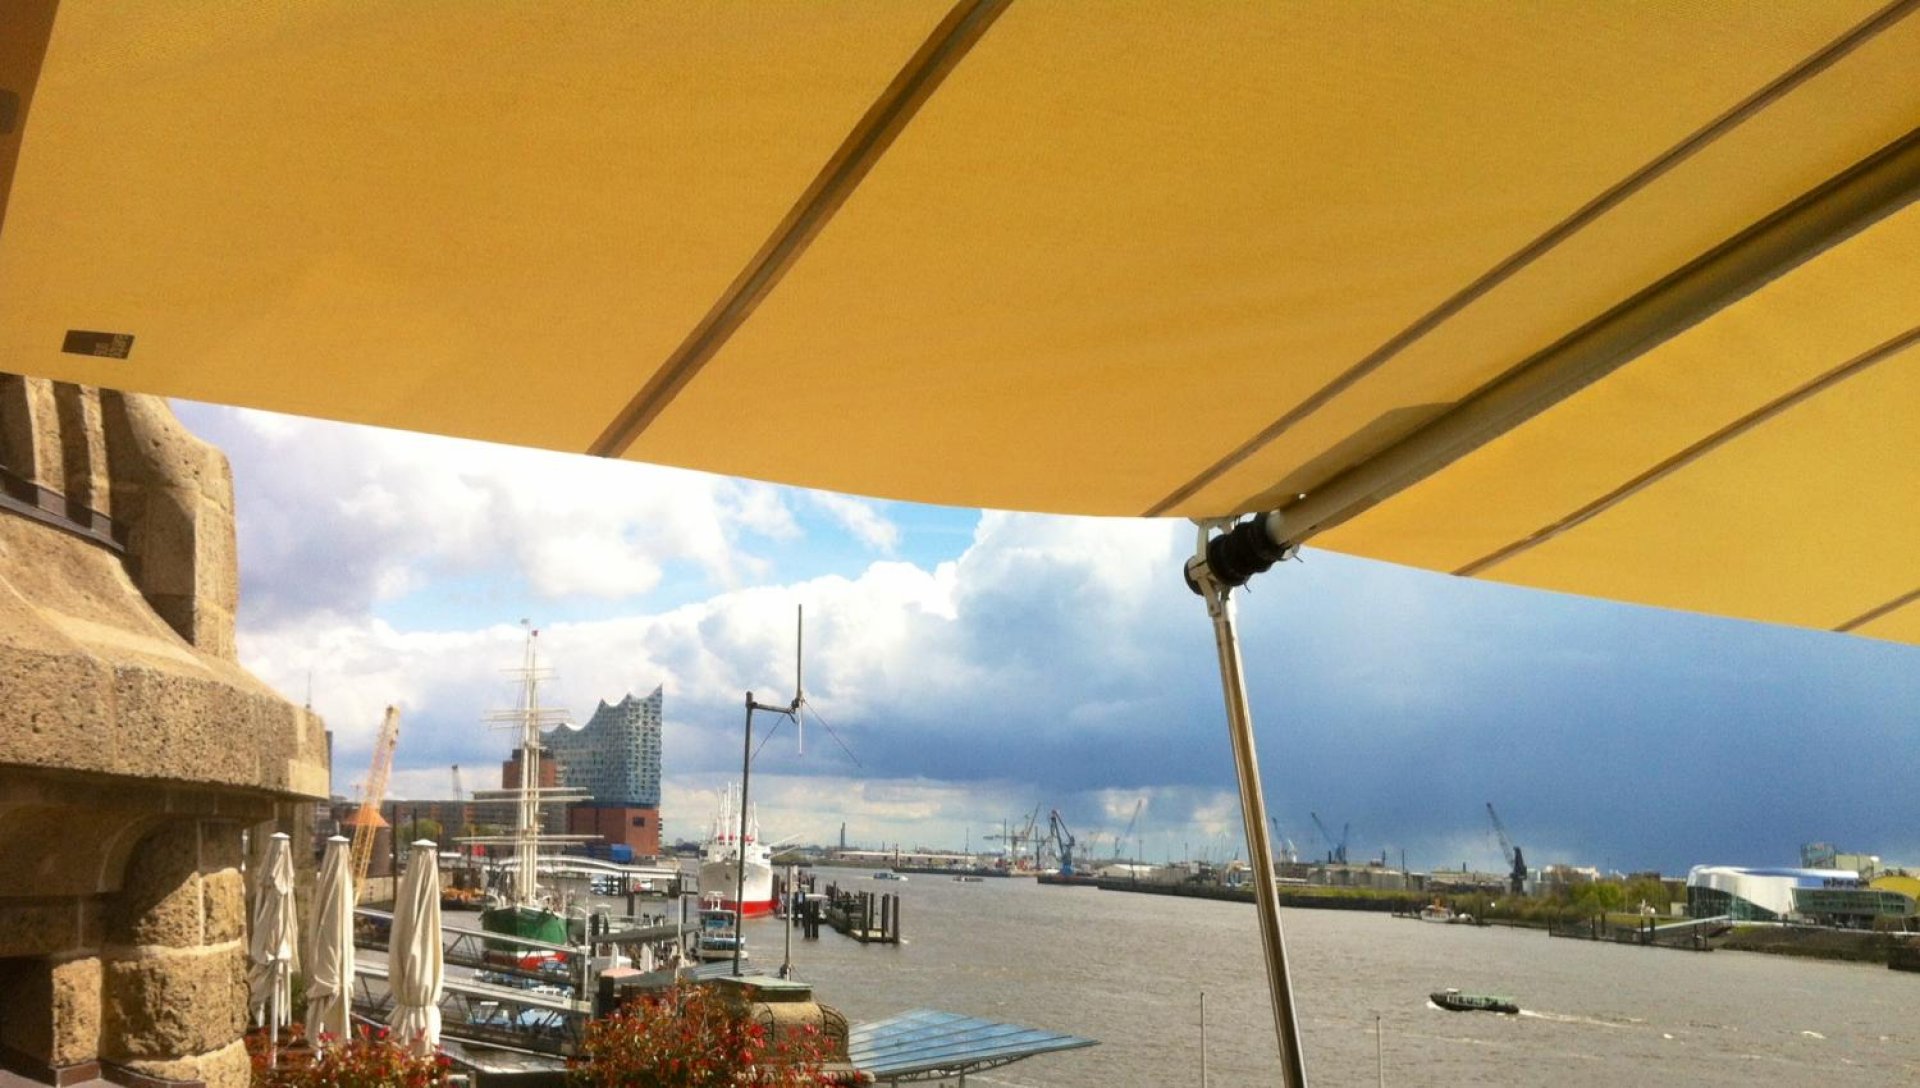 The port club in Hamburg is shaded with an original SunSquare sun sail.